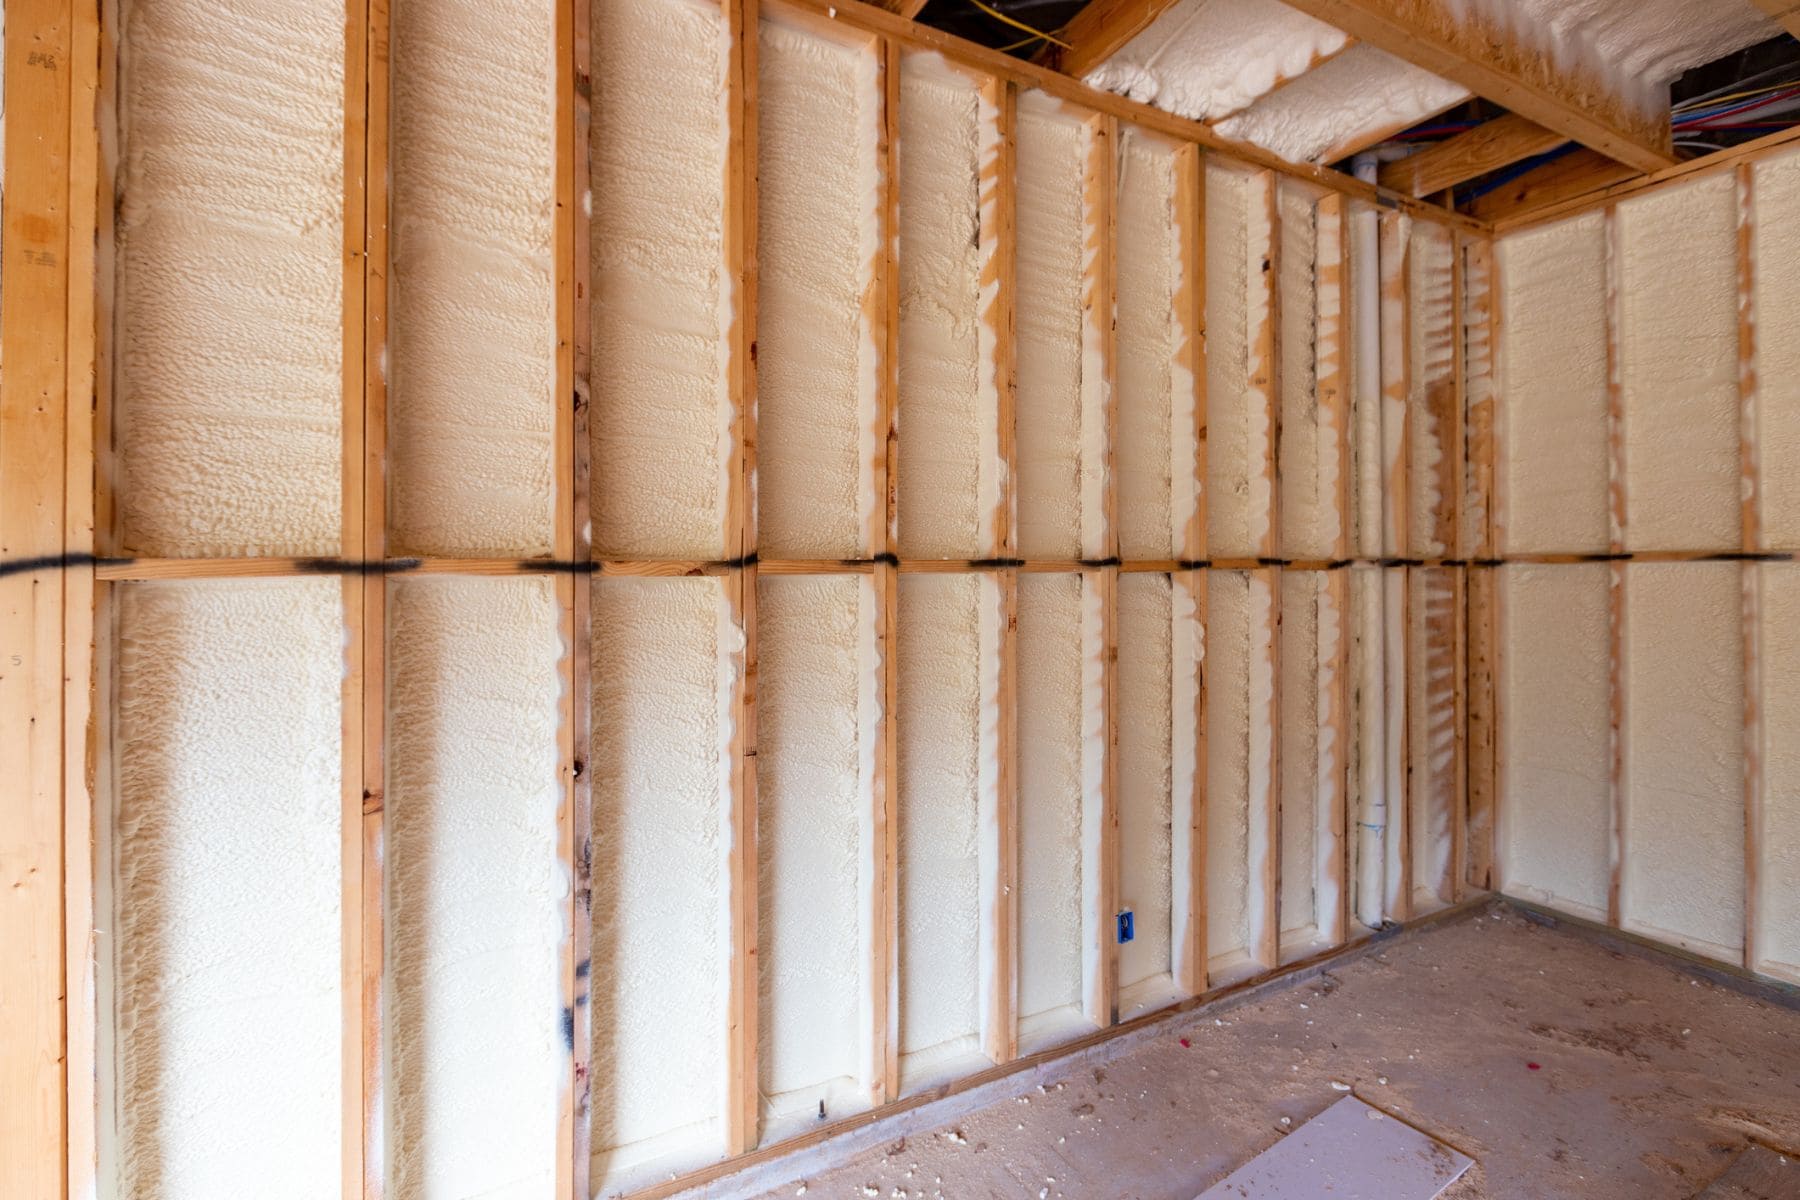 Wall in new home under construction, with spray foam insulation